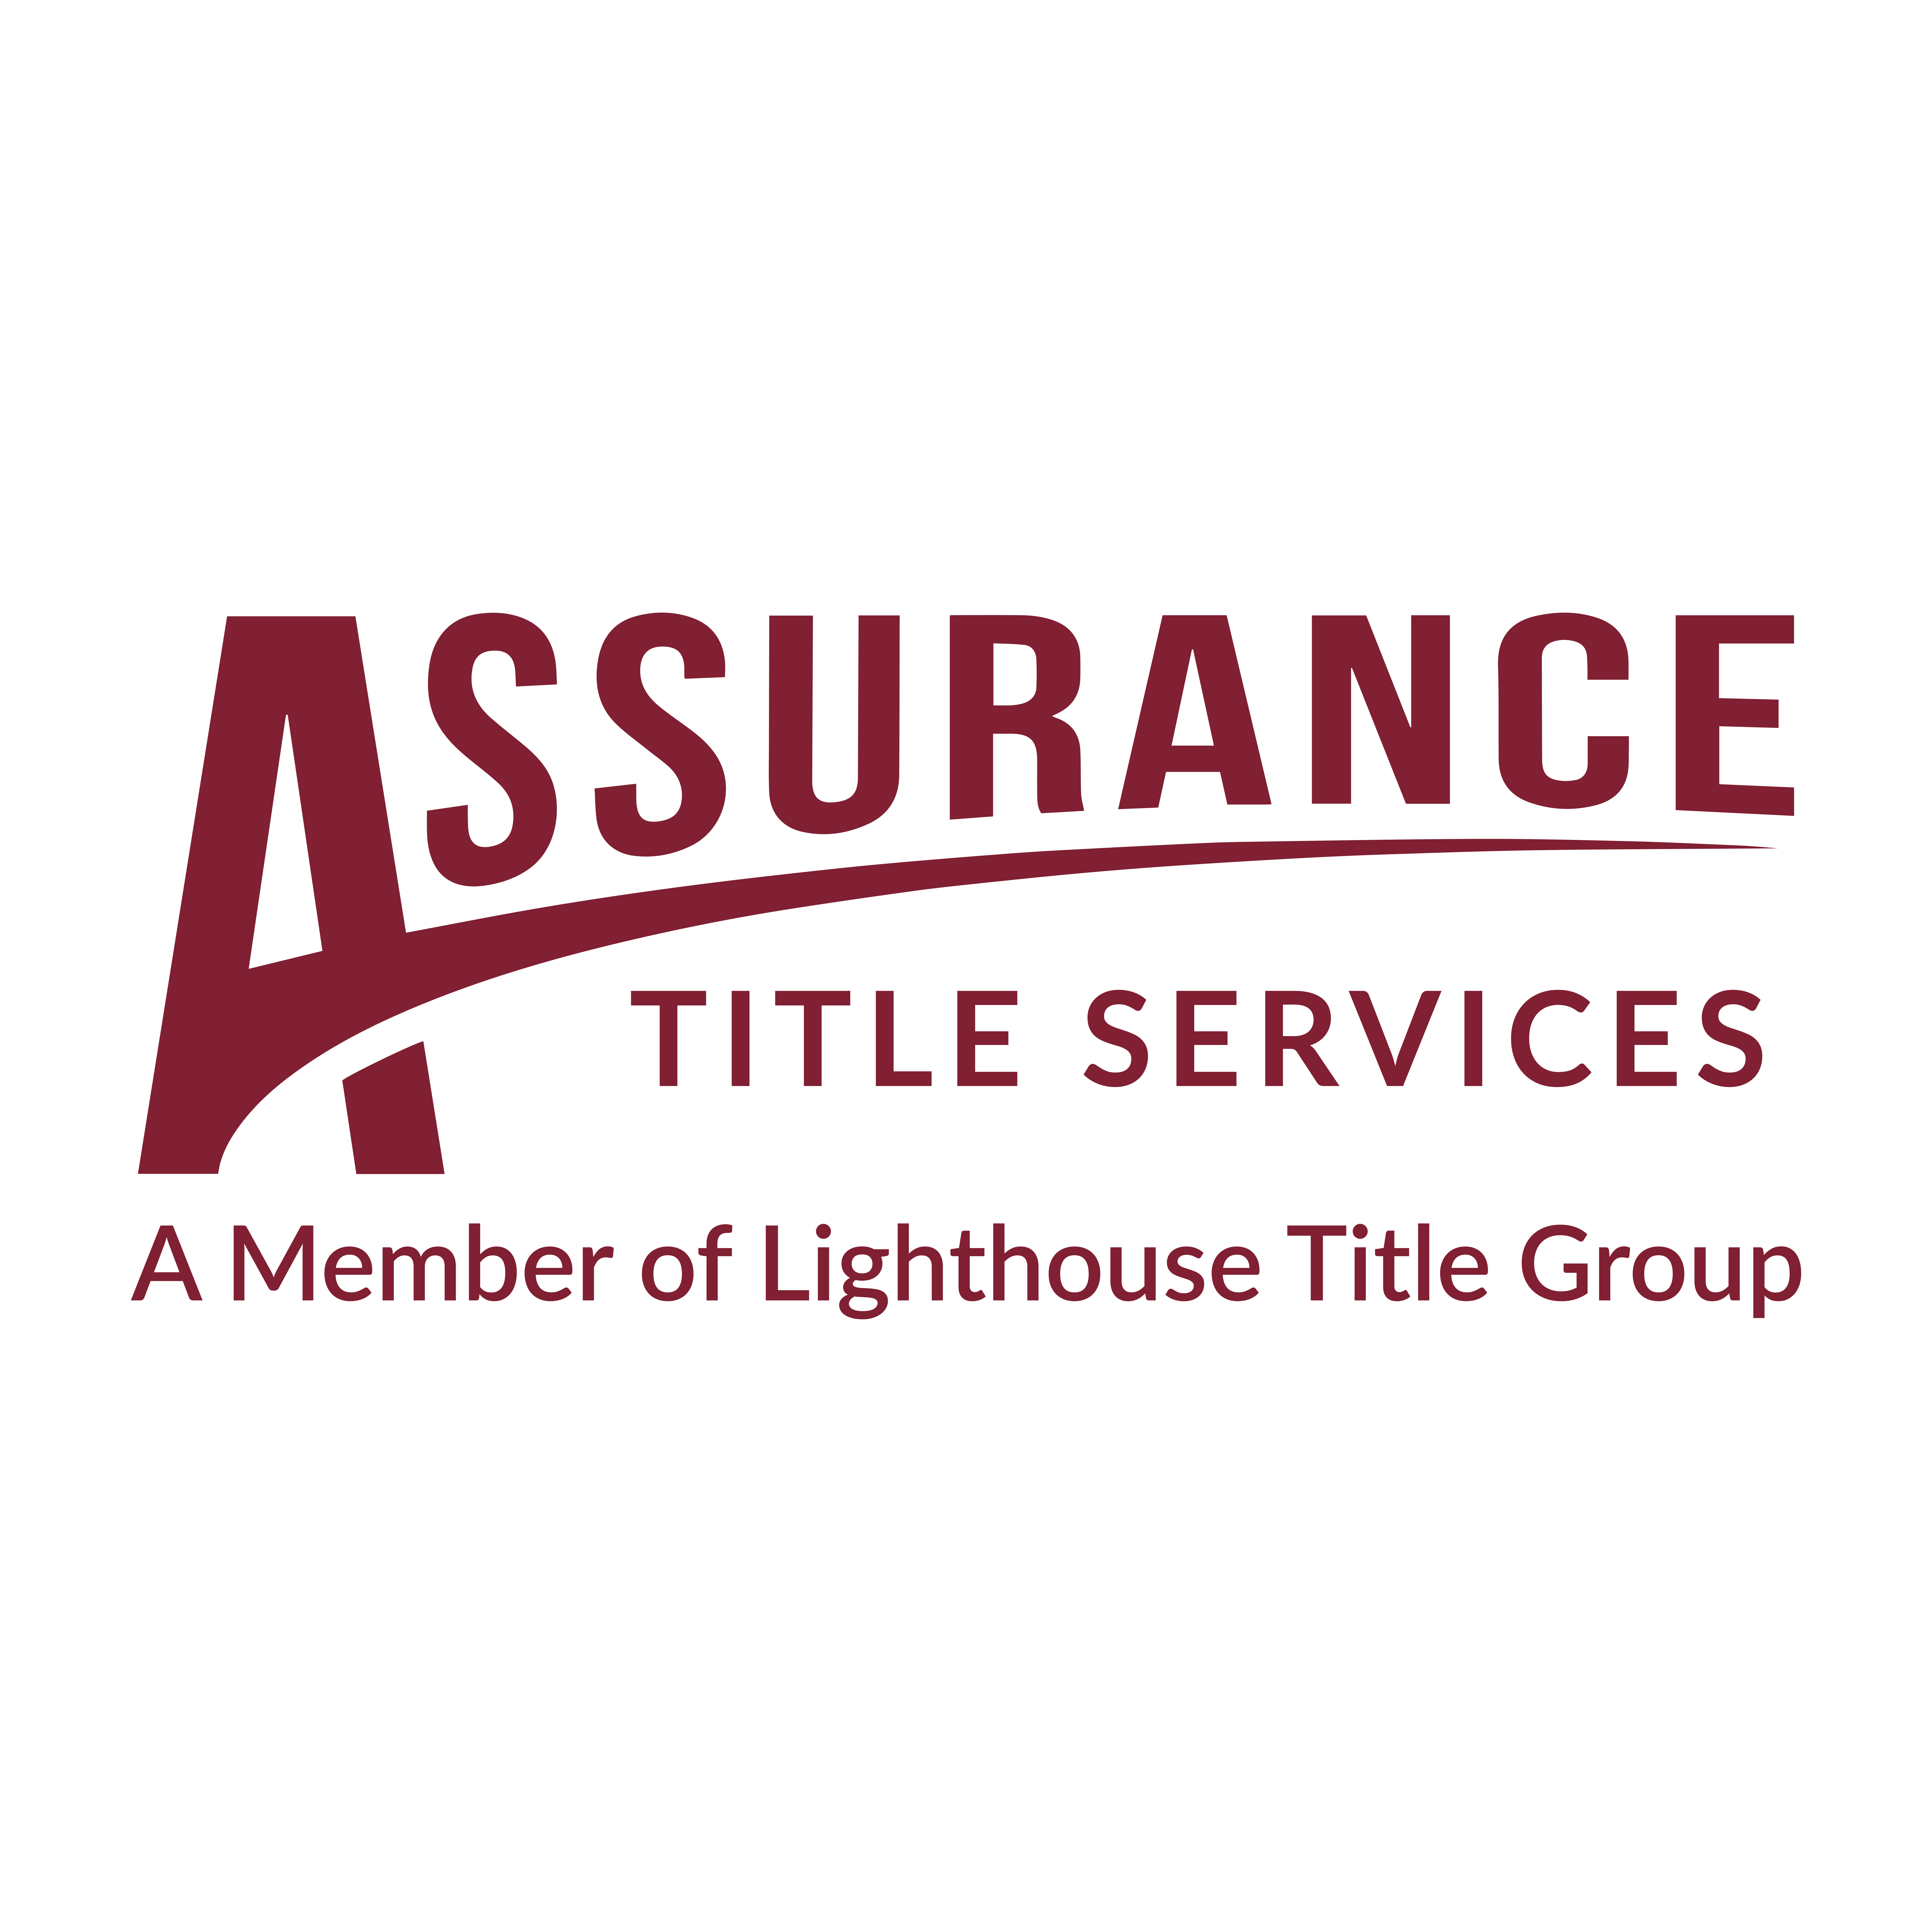 Assurance Title, A Member of Lighthouse Title Group - Oshkosh, WI 54902 - (920)235-0017 | ShowMeLocal.com